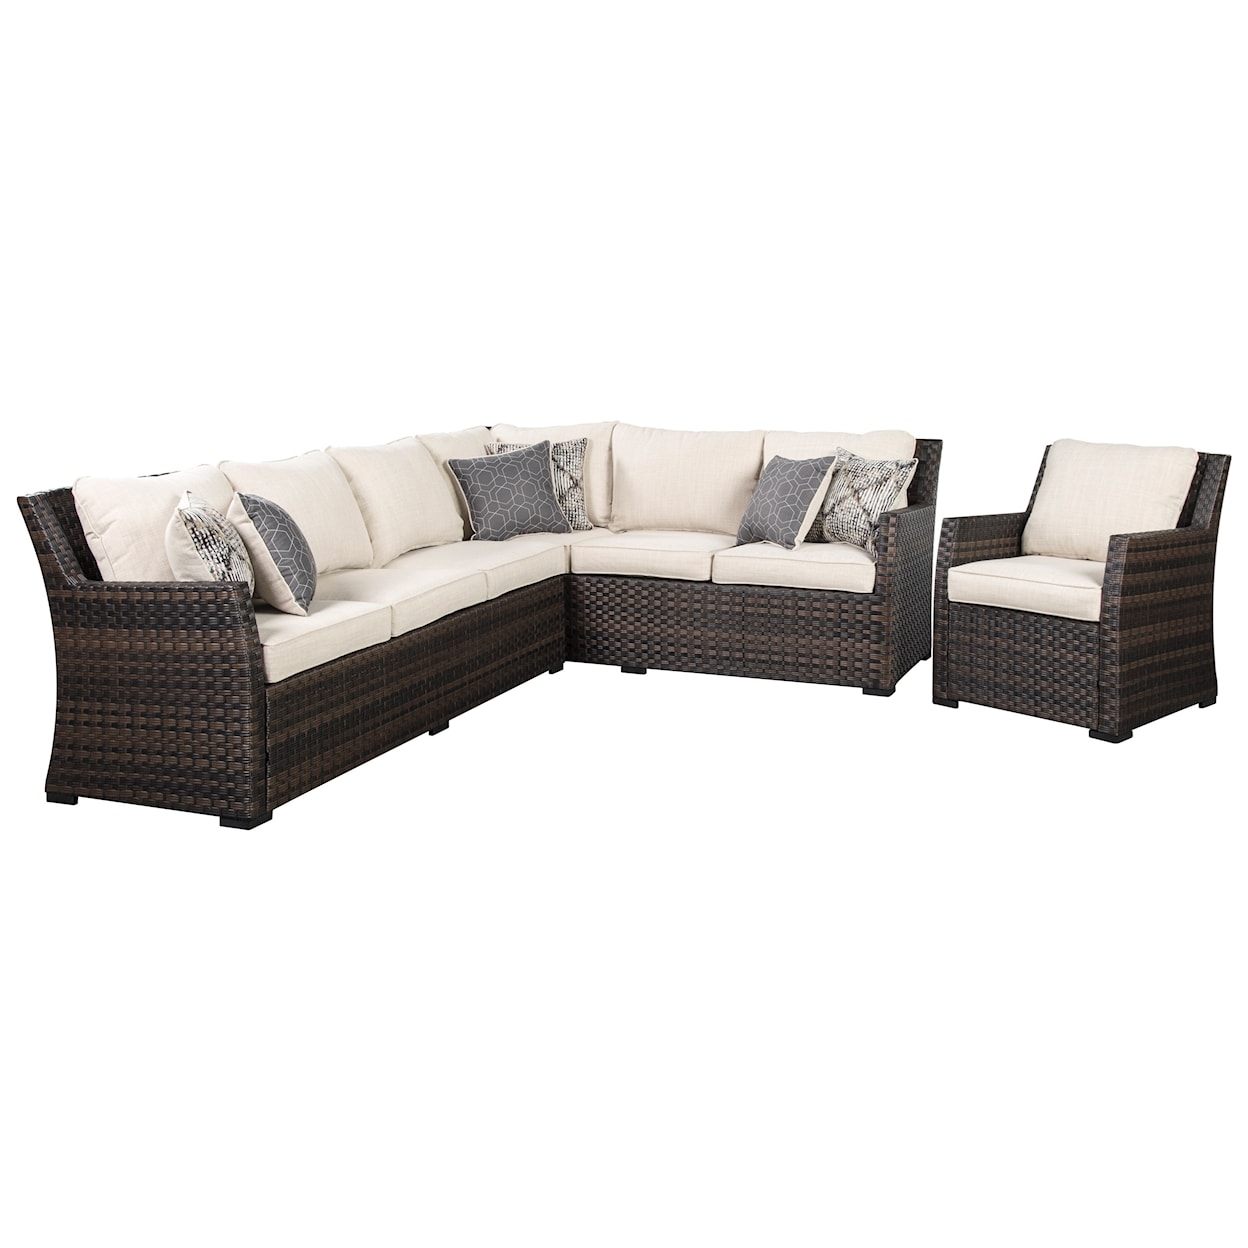 Belfort Select Sandpiper Outdoor Sectional with Table & 2 Chairs